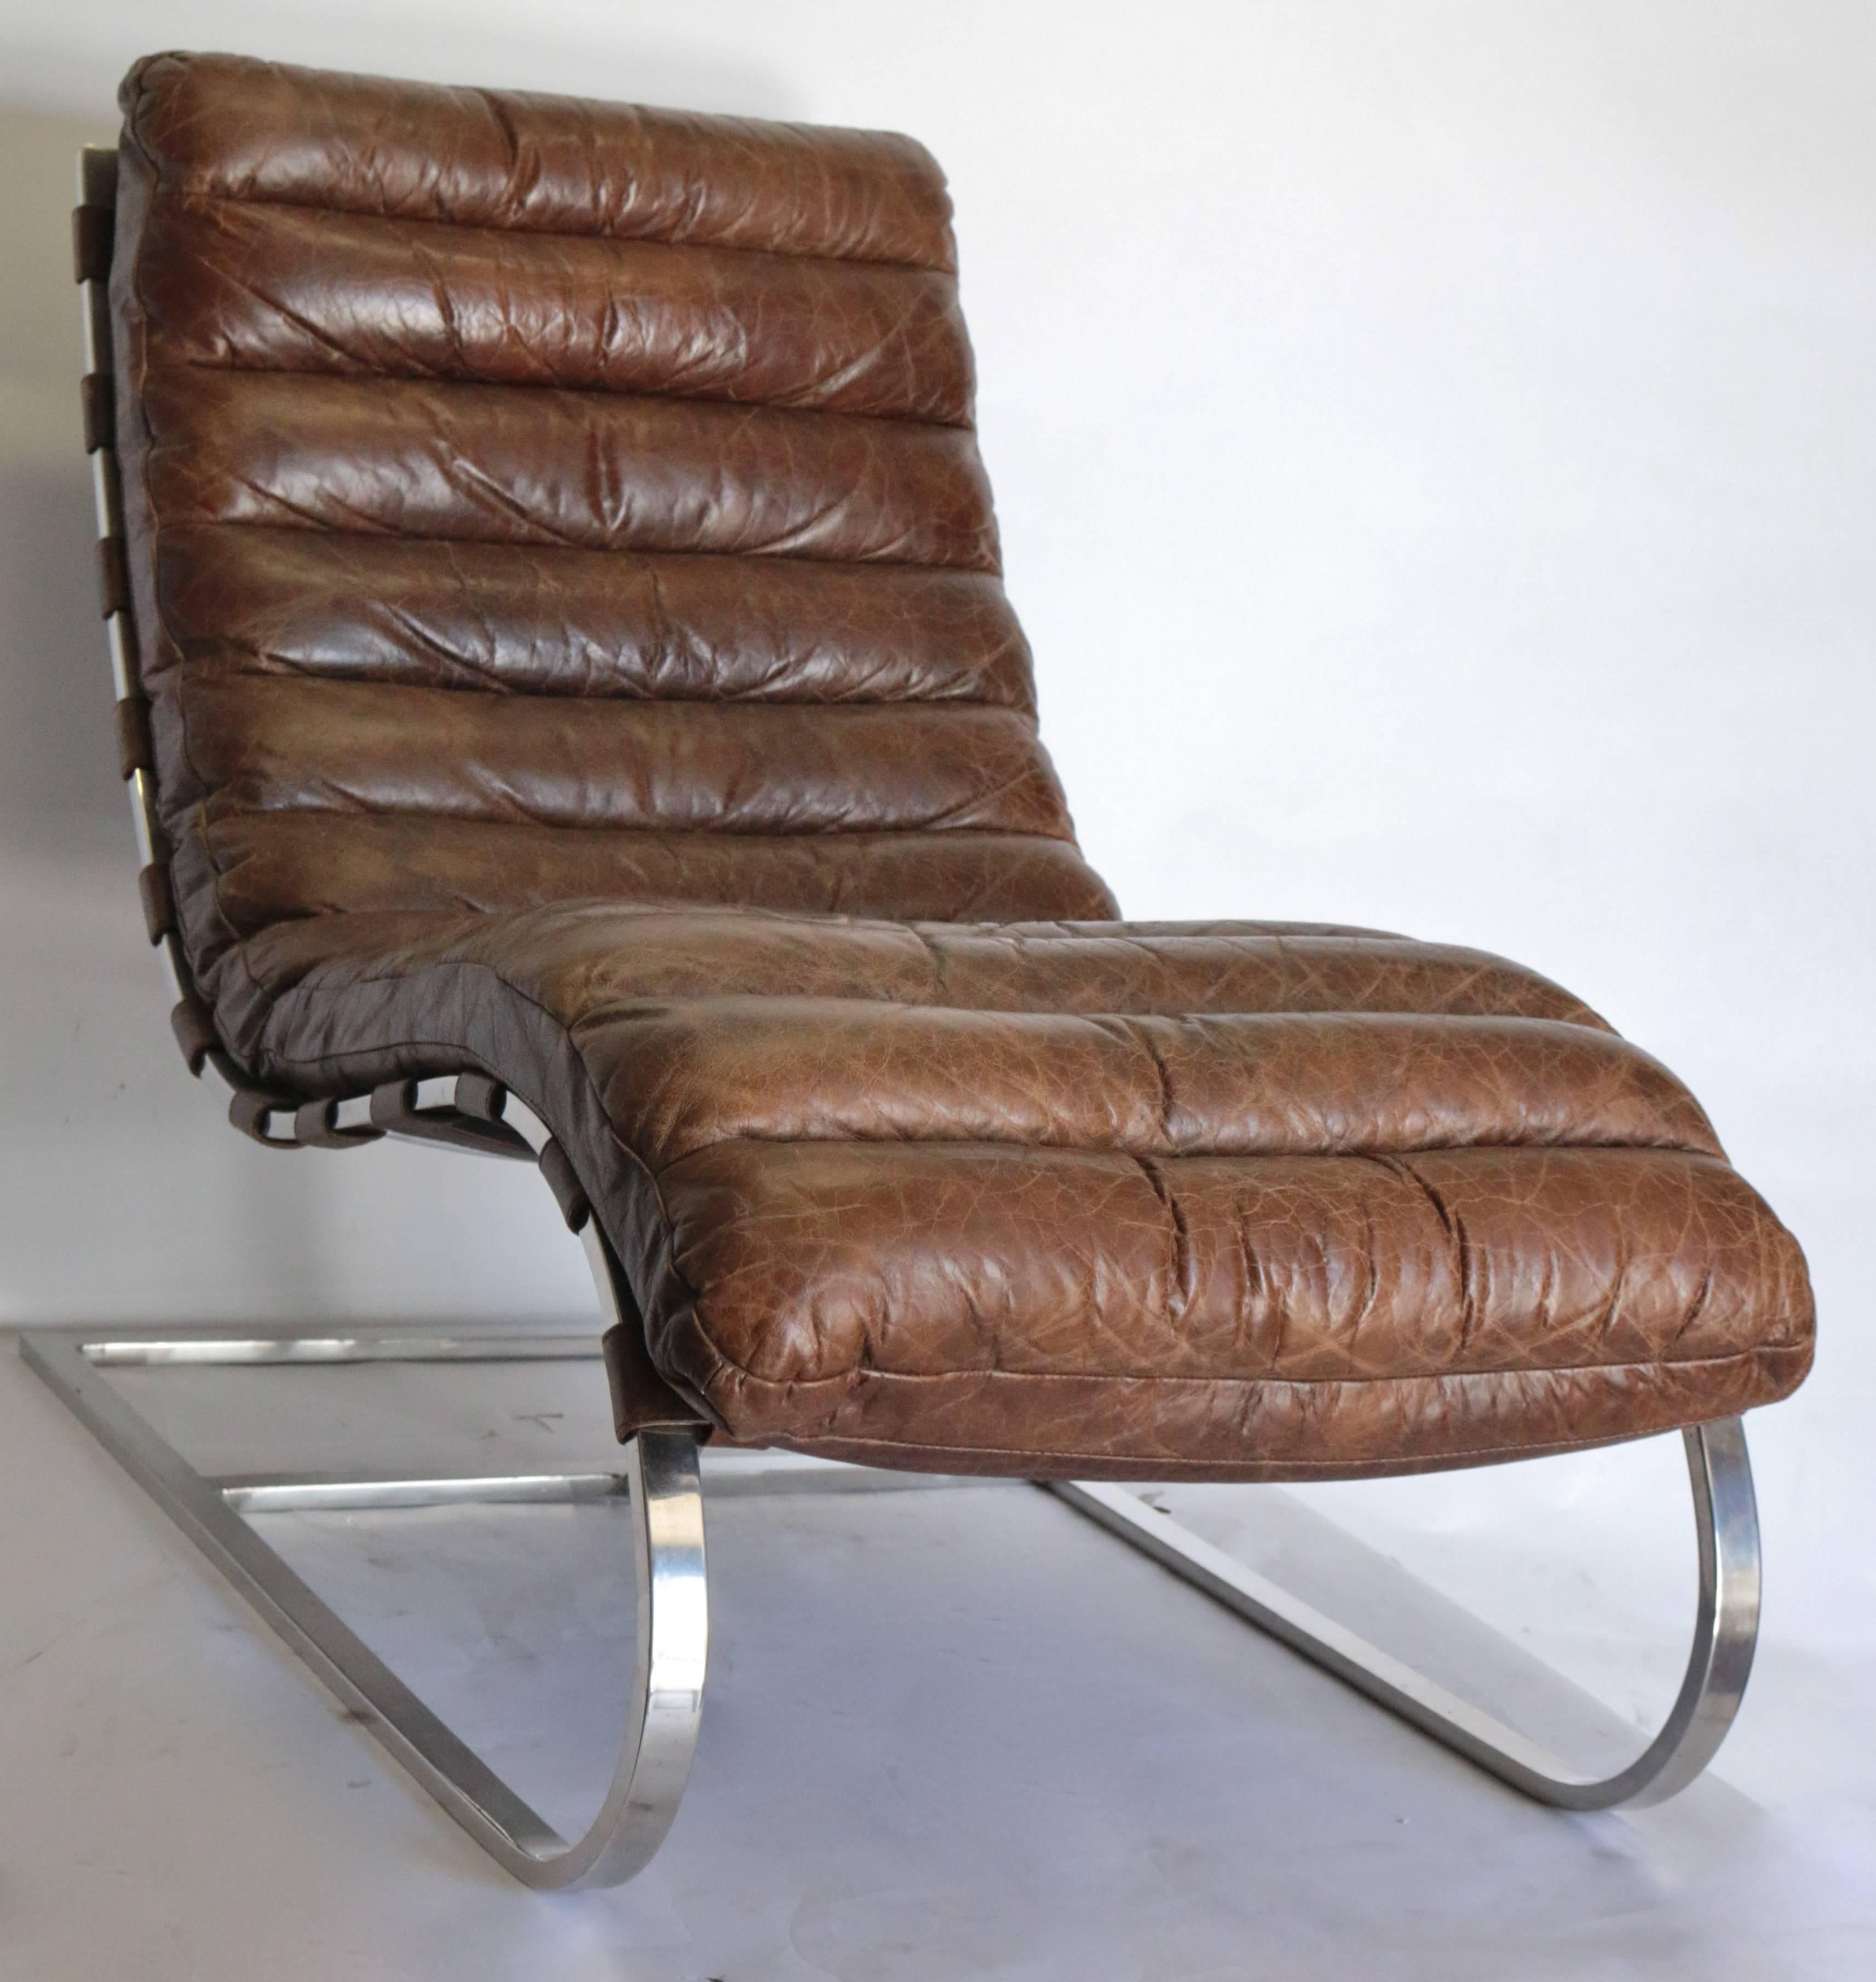 Iconic chaise lounge chair from the 1970s combines chrome and tufted thick padded cushion combined for optimal comfort. Mid-Century French distressed tufted leather chaise longue chair with chrome base is in excellent used condition. This 1970s